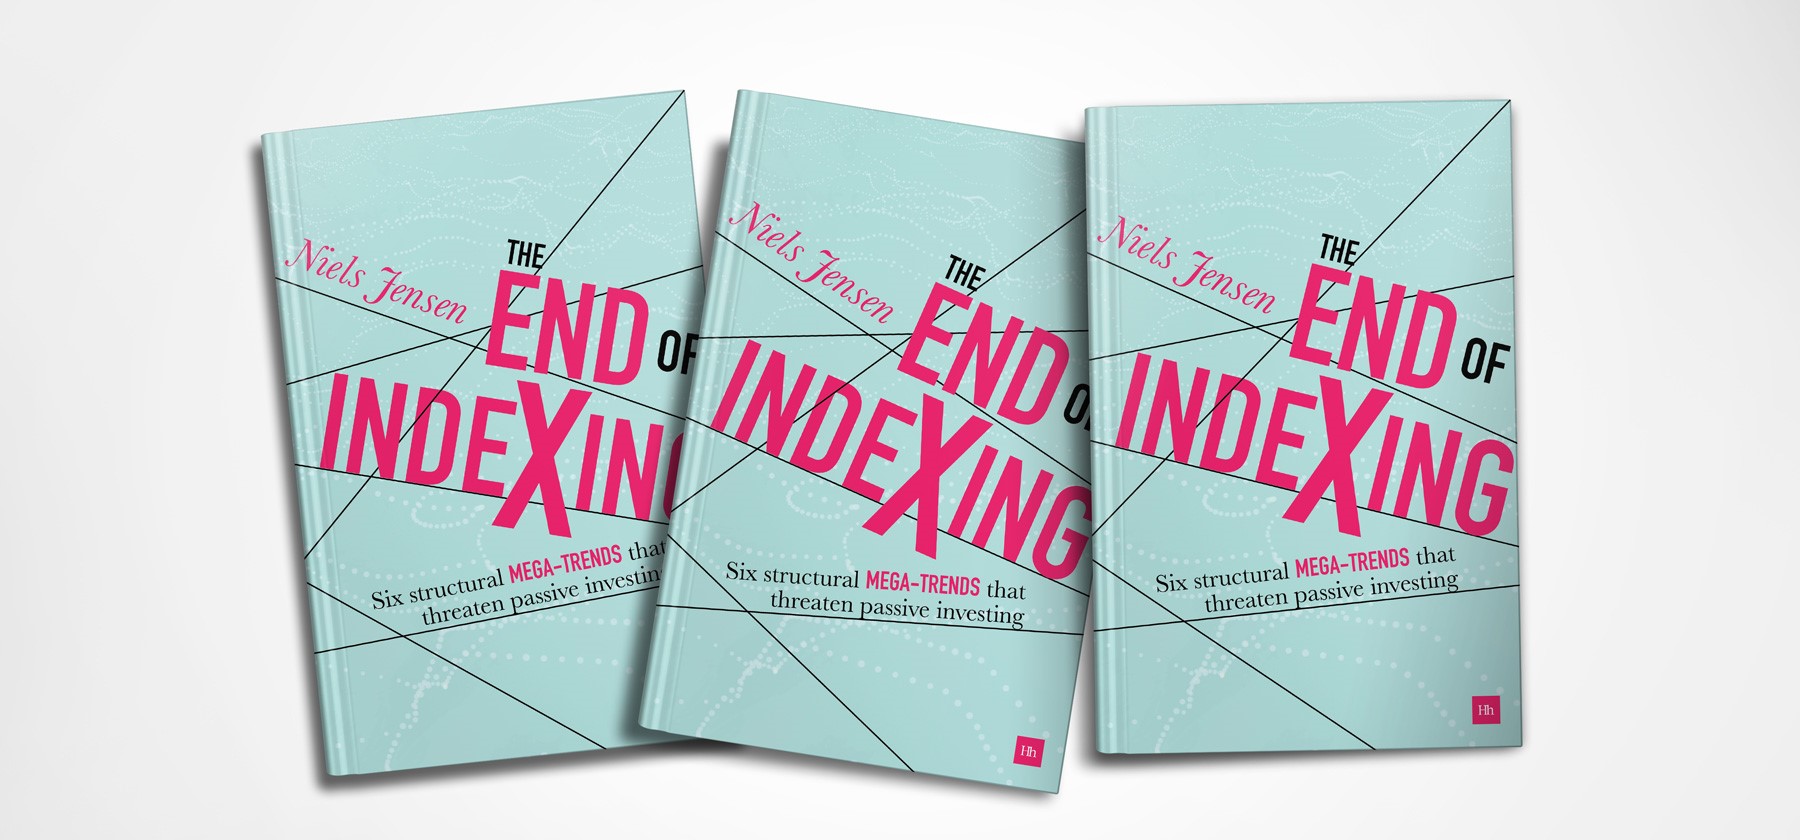 Exhibit 1: The front cover of The End of Indexing